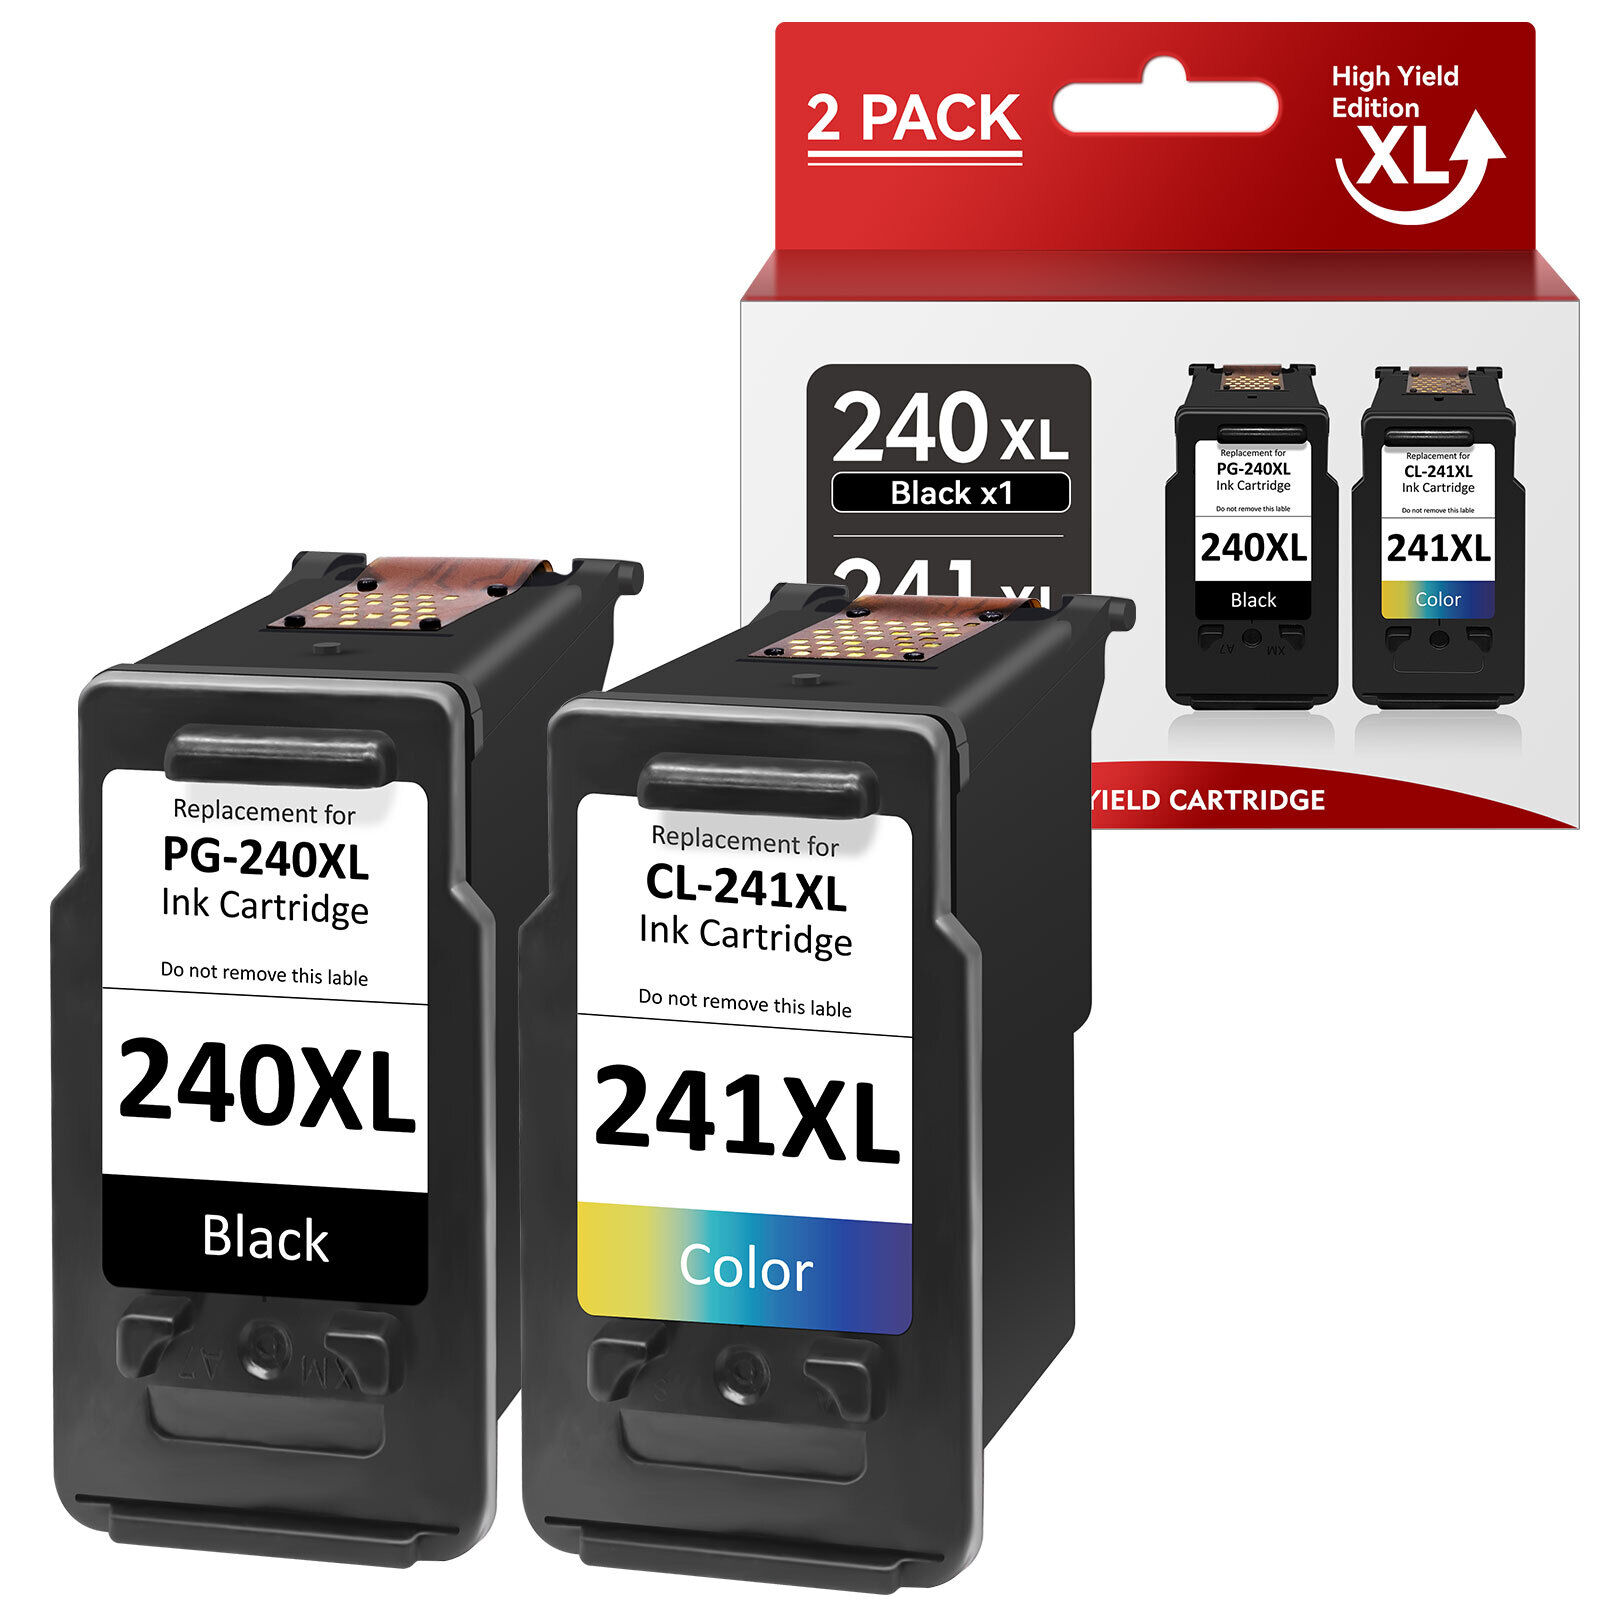 2Pack PG-240XL CL-241XL Ink Cartridge for Canon 240 241 PIXMA MG3620 MX472 MX432